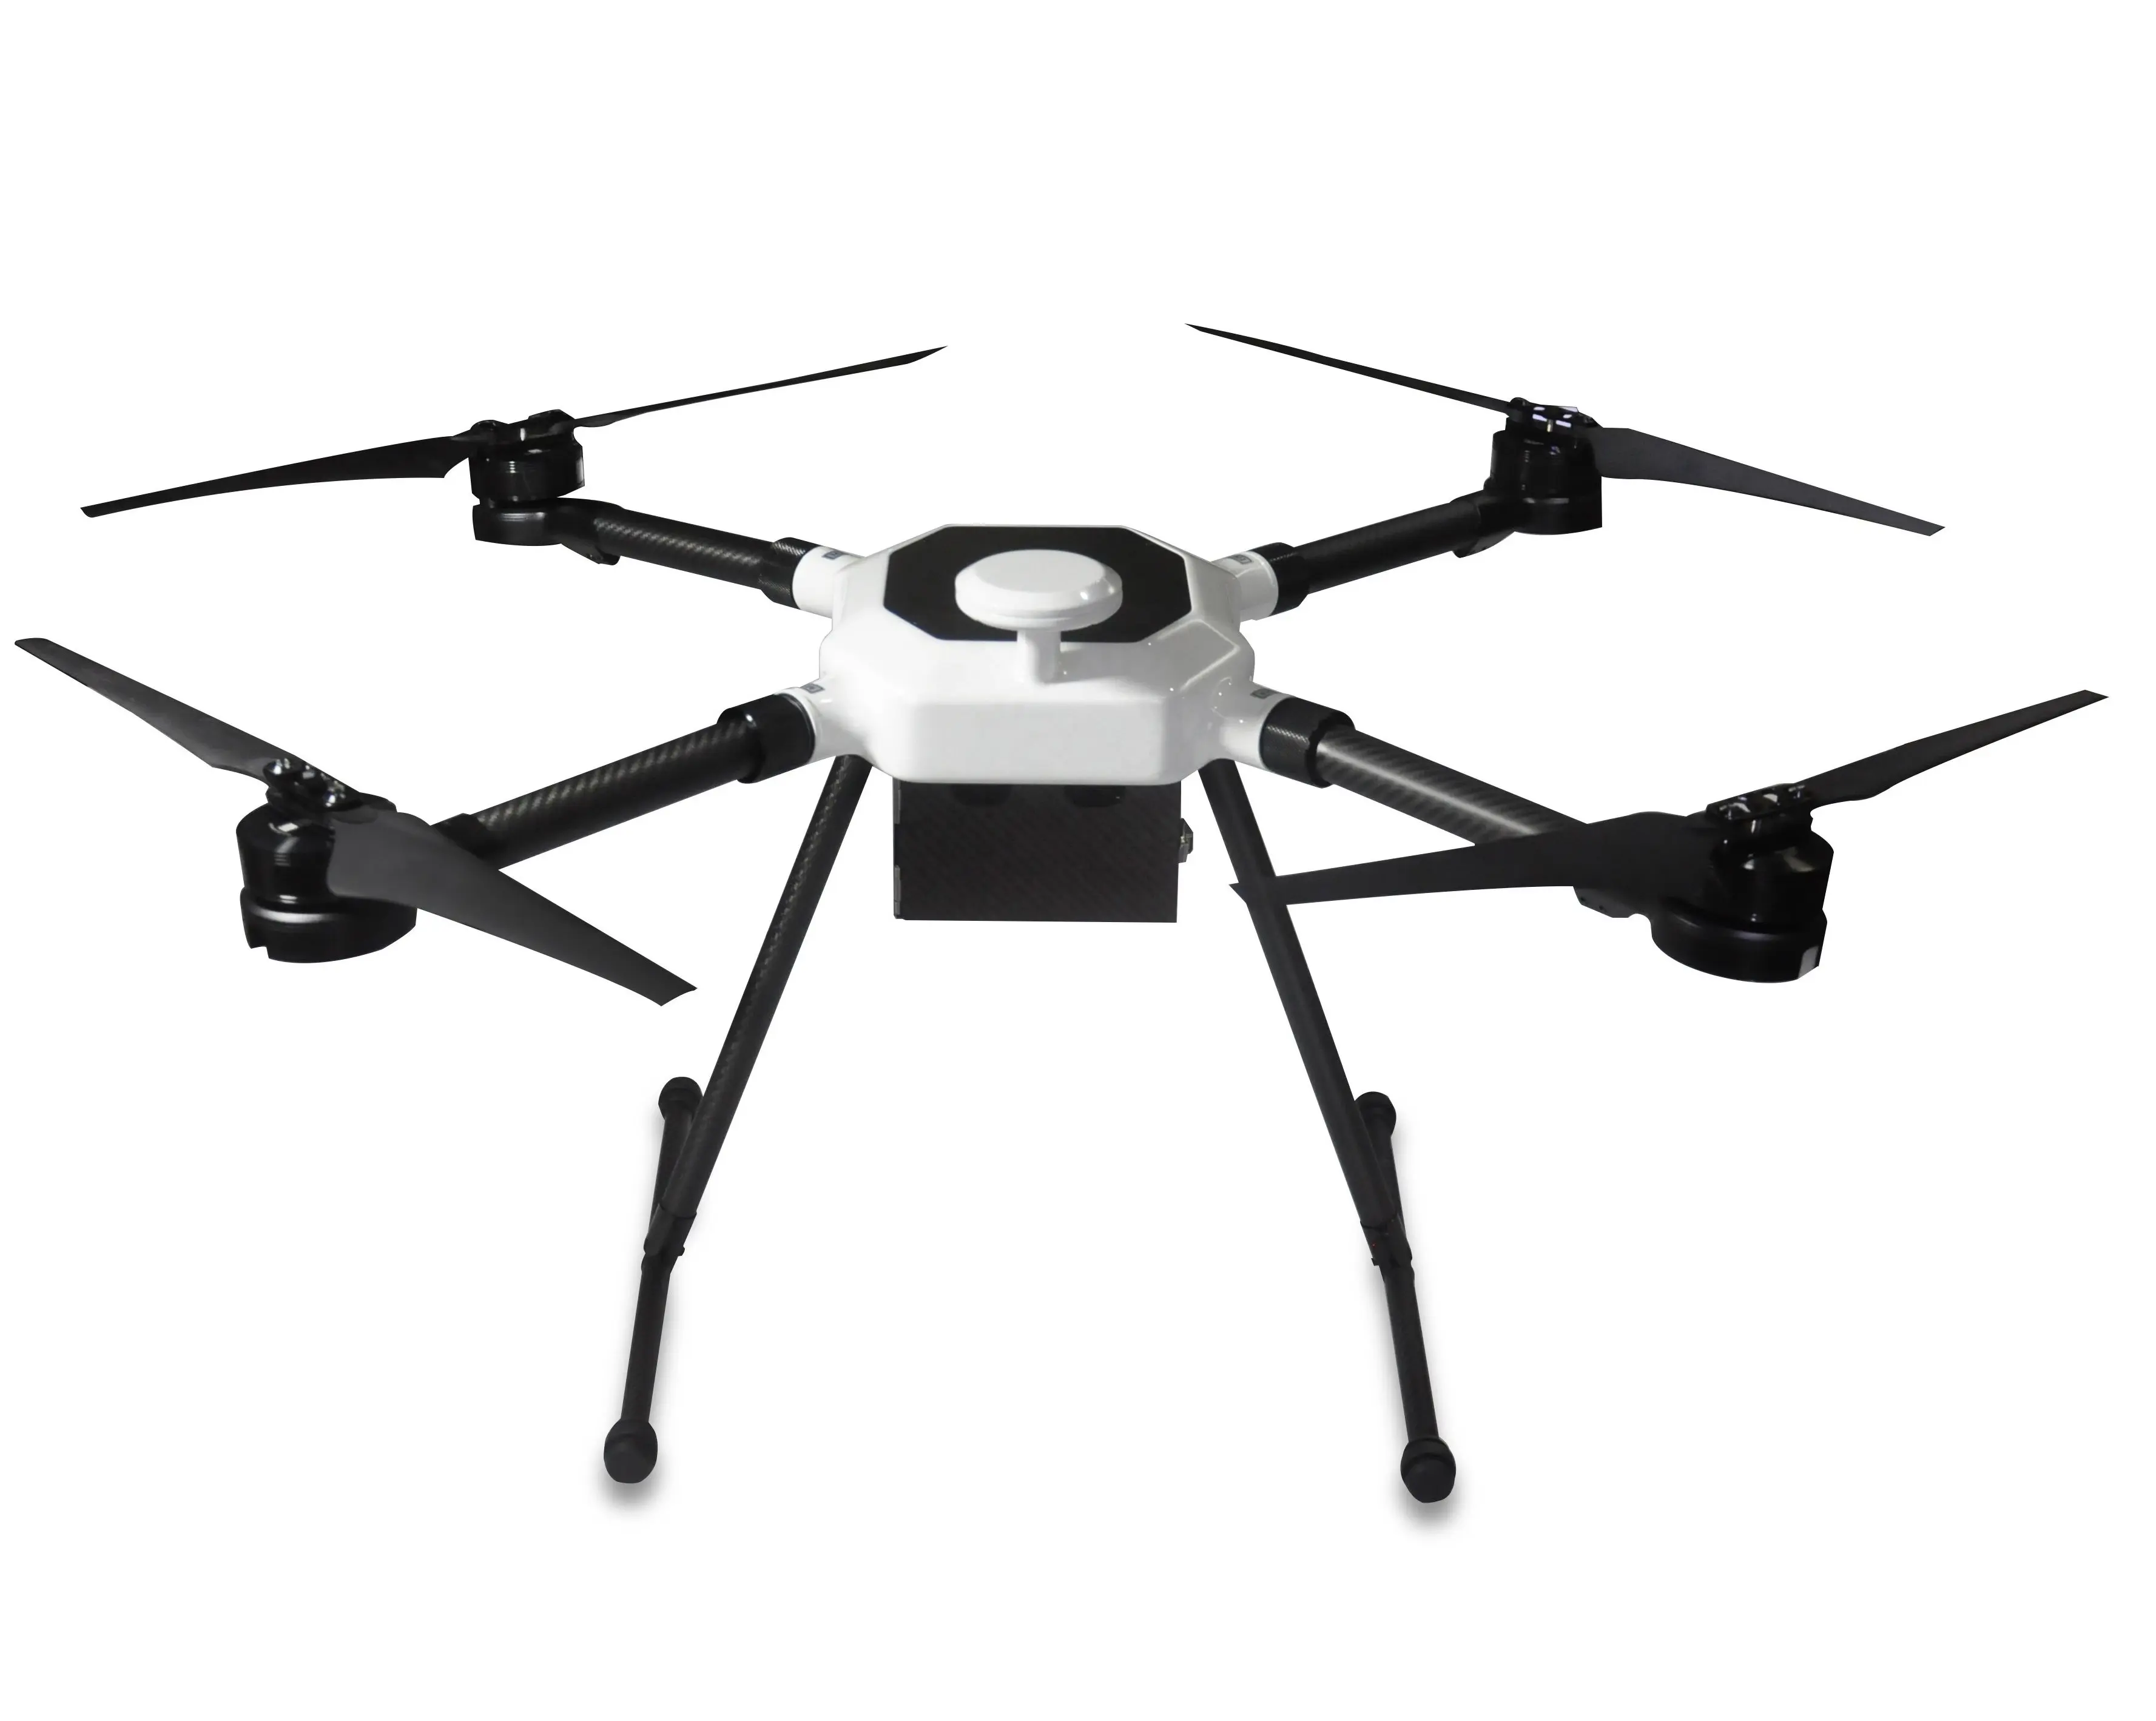 Portable Quadrotor 4-axis Drone Long Endurance Industrial UAV for Inspection and Surveillance